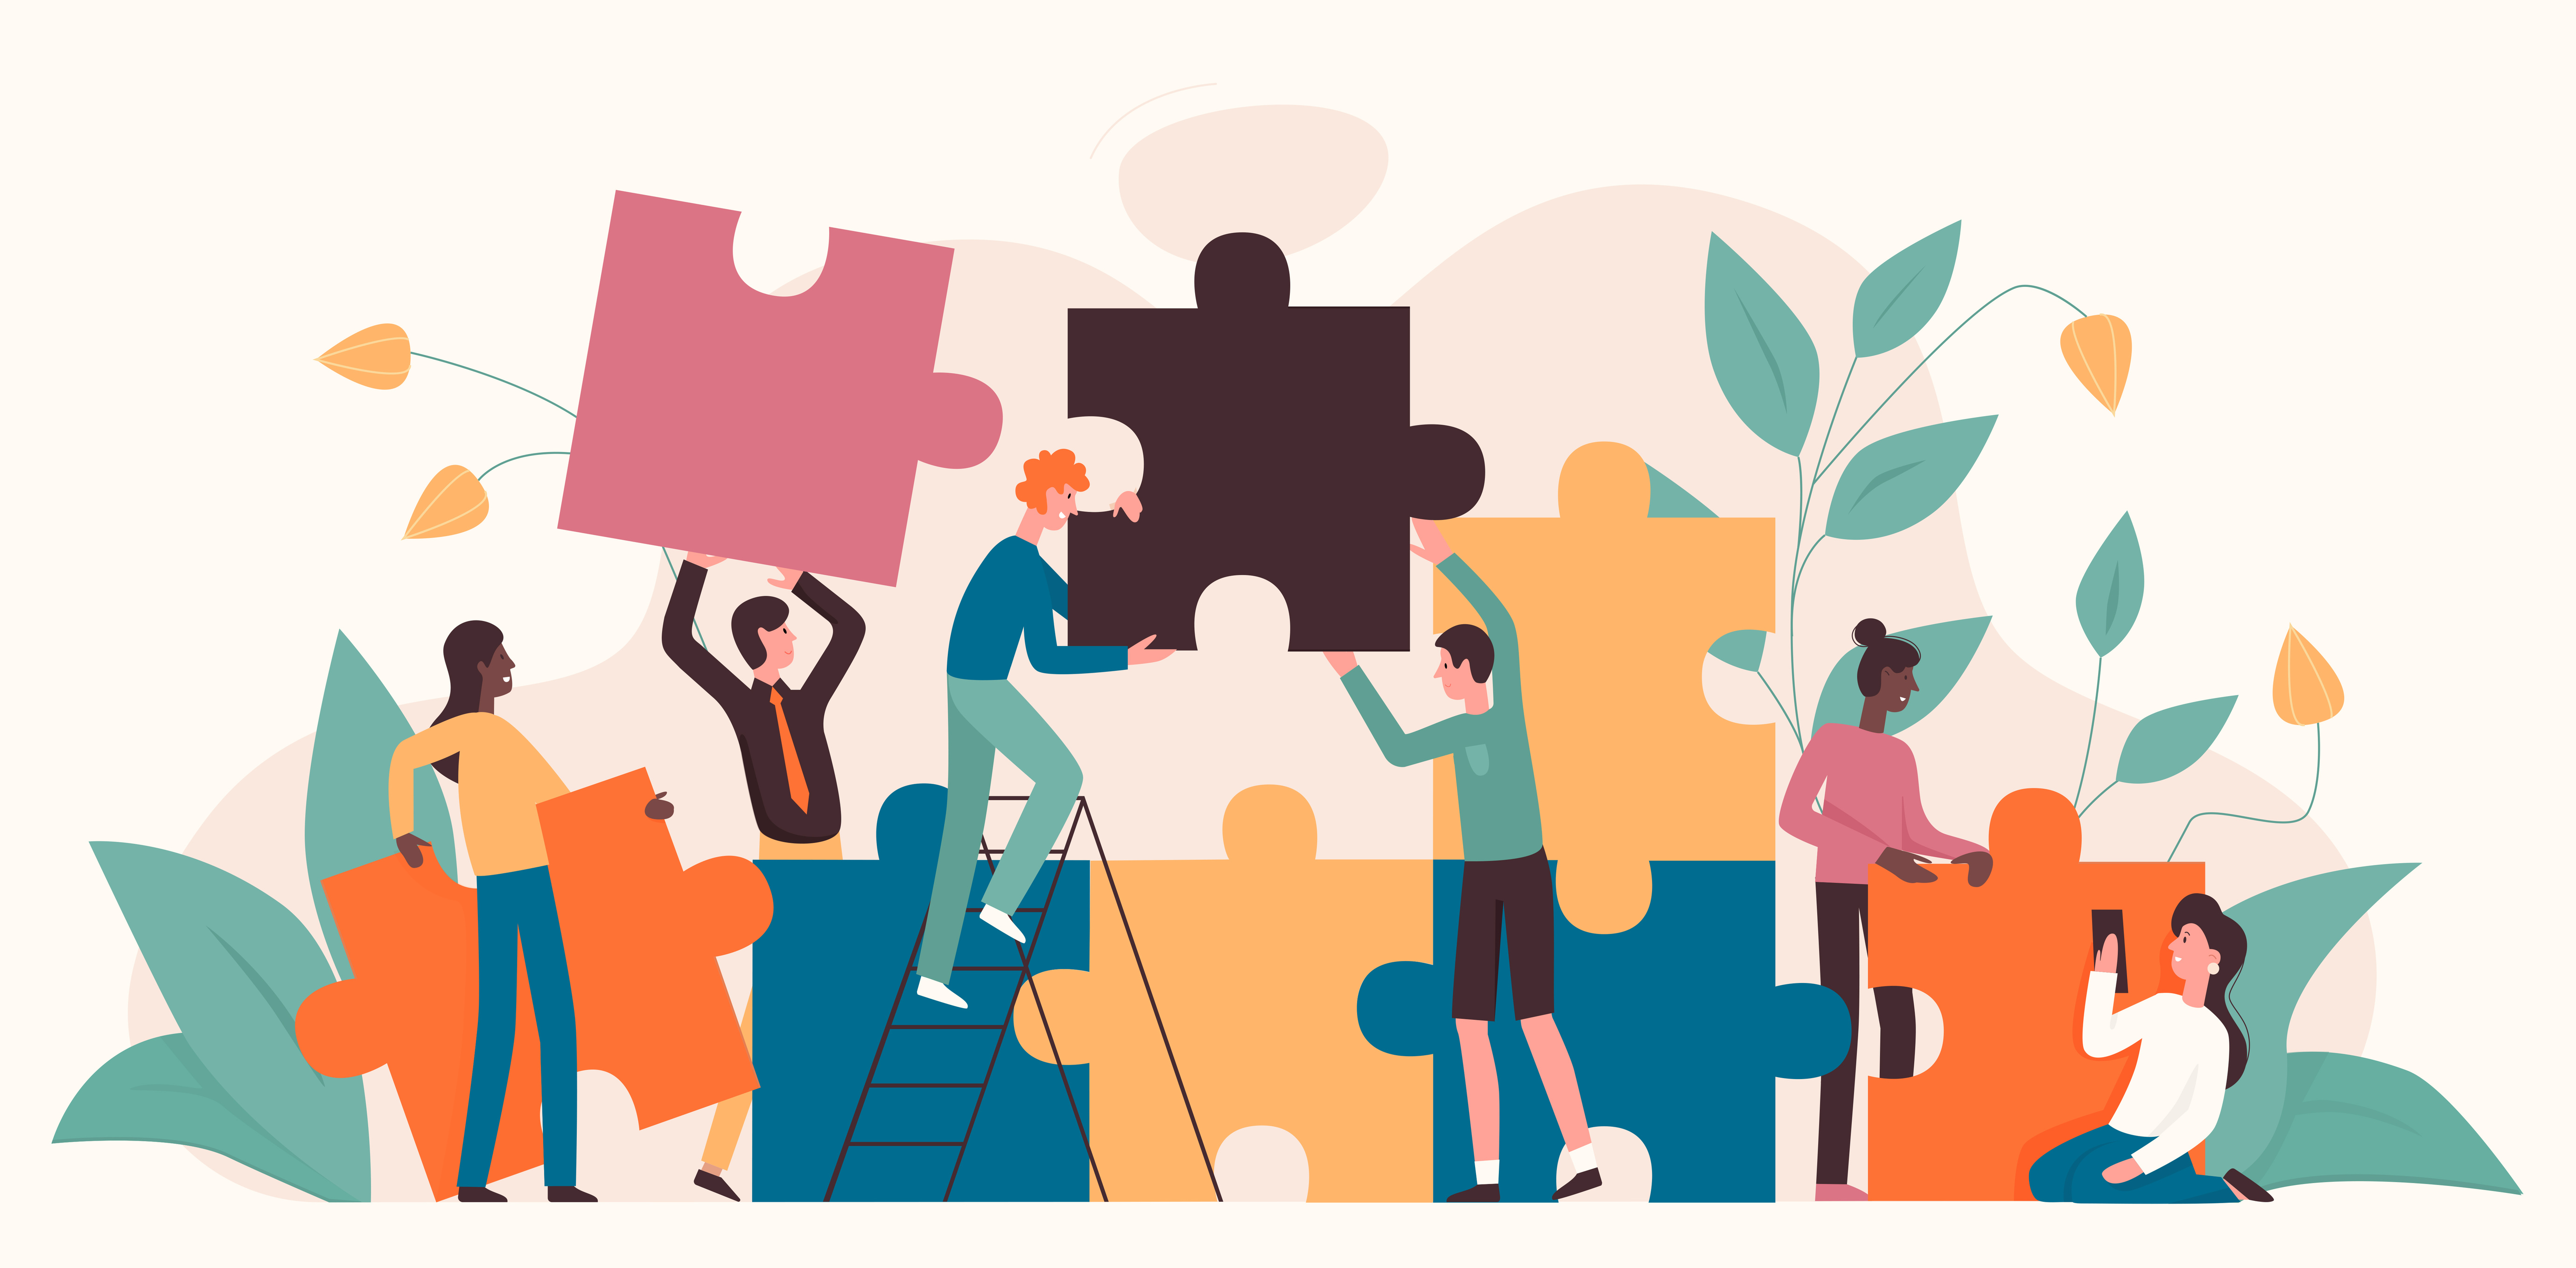 Illustration of diverse individuals piecing together a large puzzle